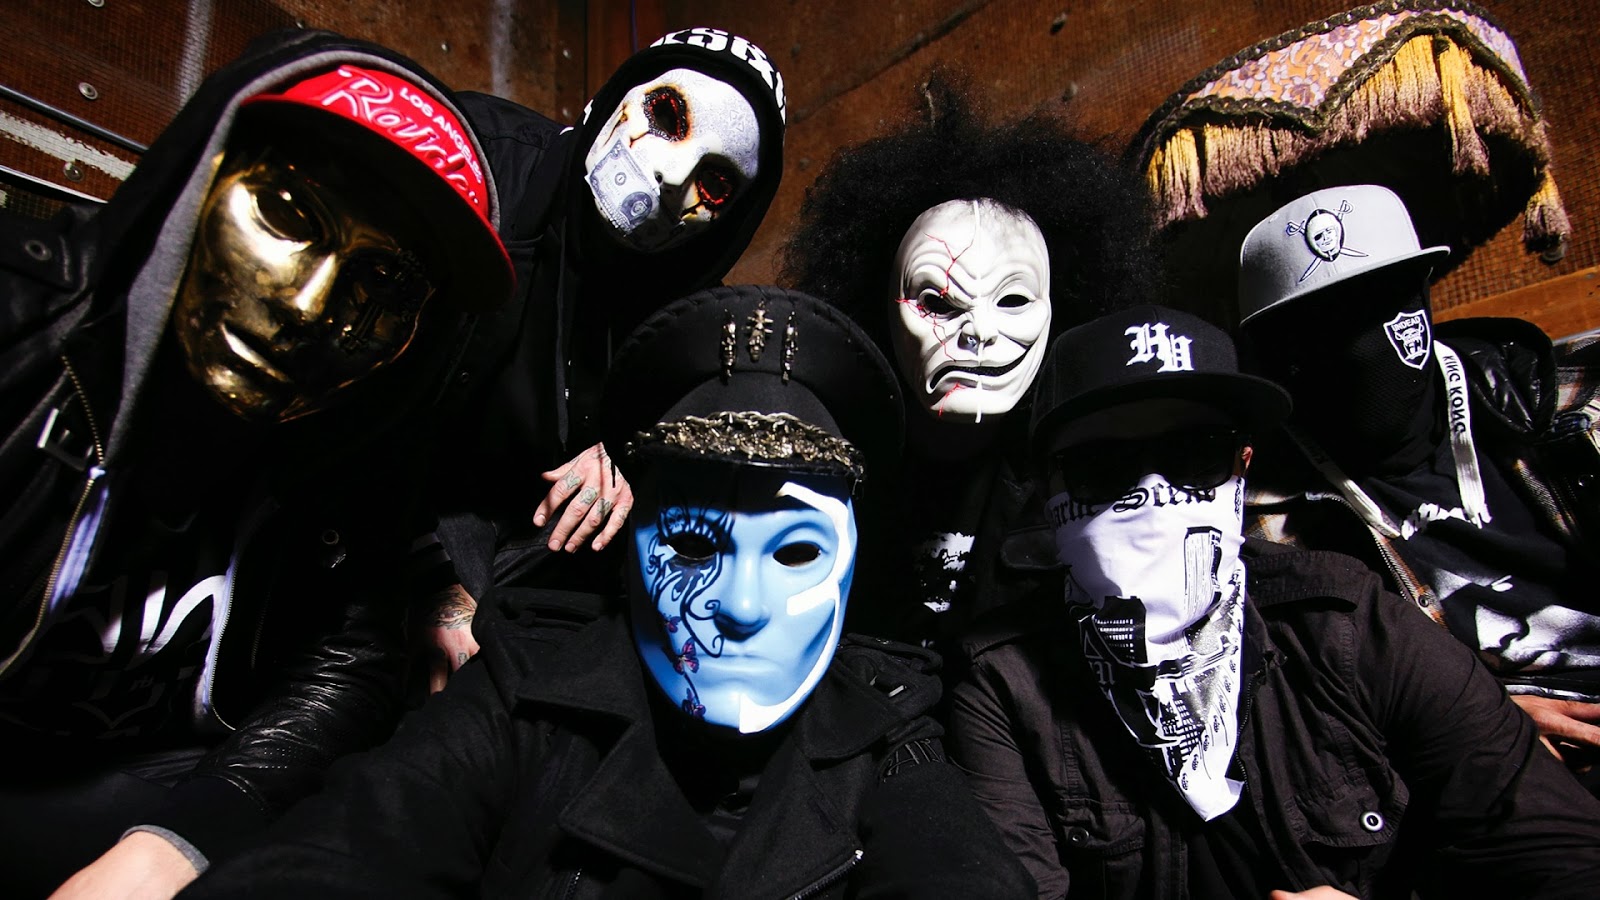 hollywood undead wallpaper,masque,mask,headgear,event,costume